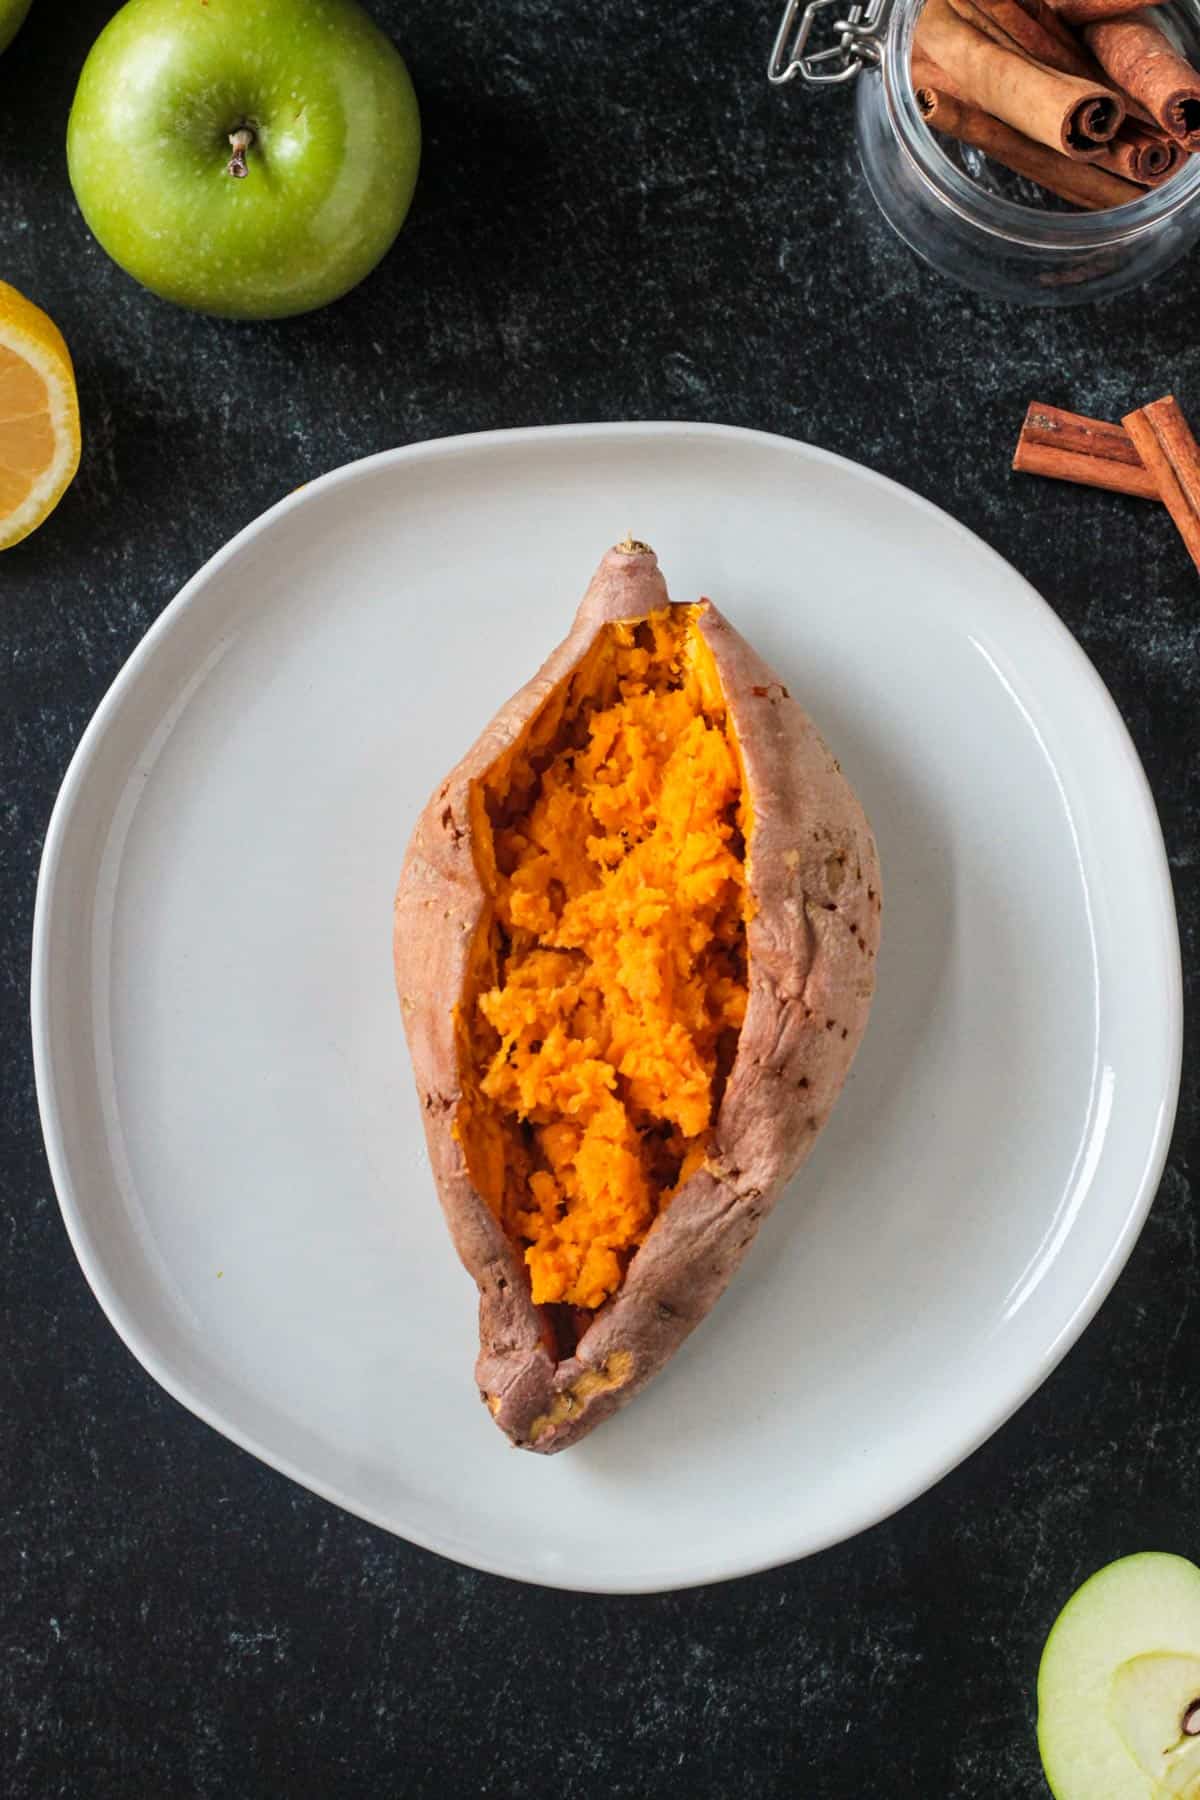 Cooked sweet potato cut open showing the fluffy inside.